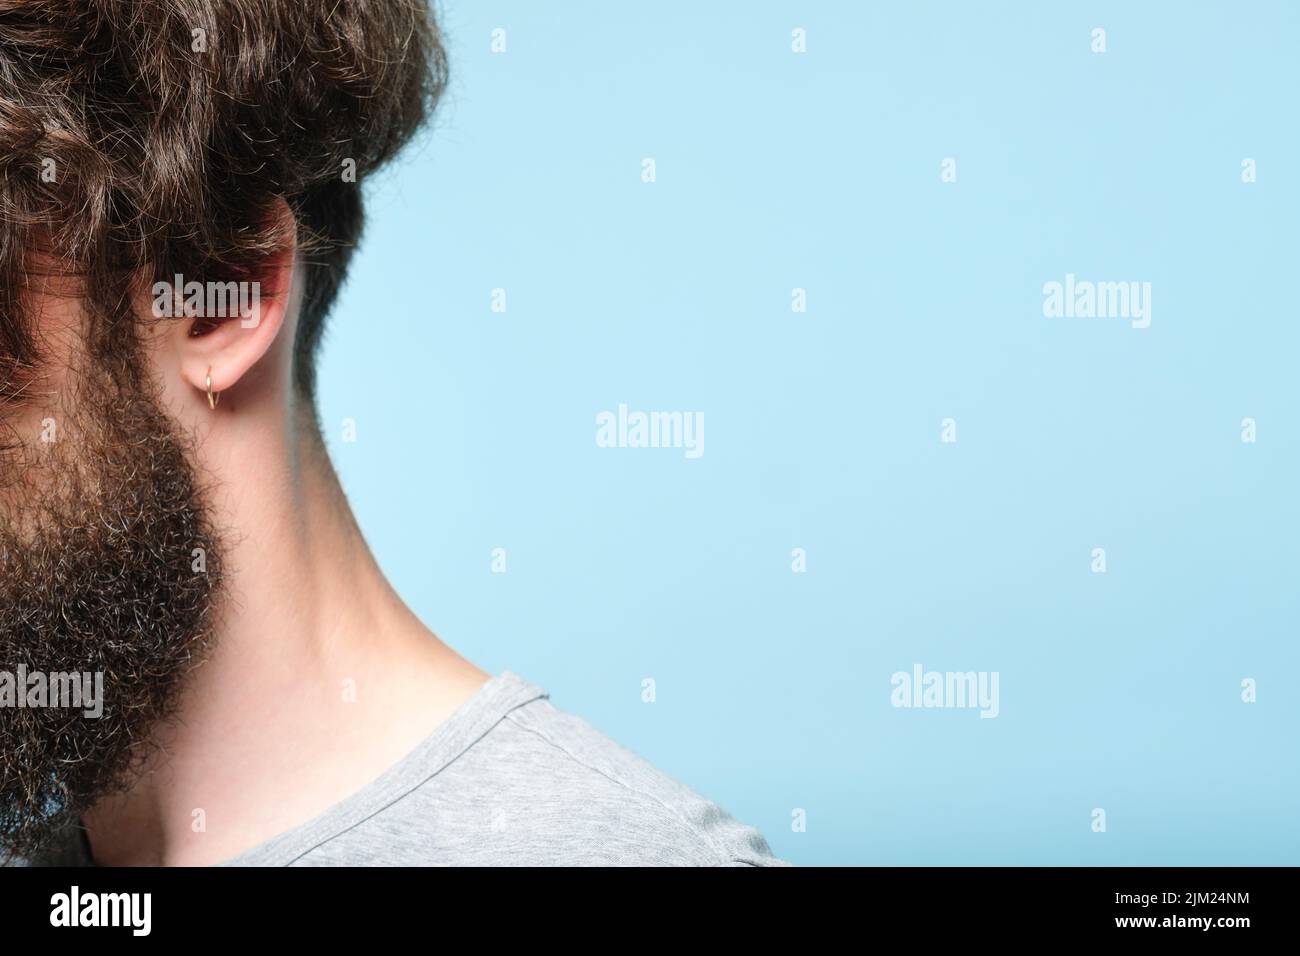 back neck curly dark haired bearded man barbershop Stock Photo